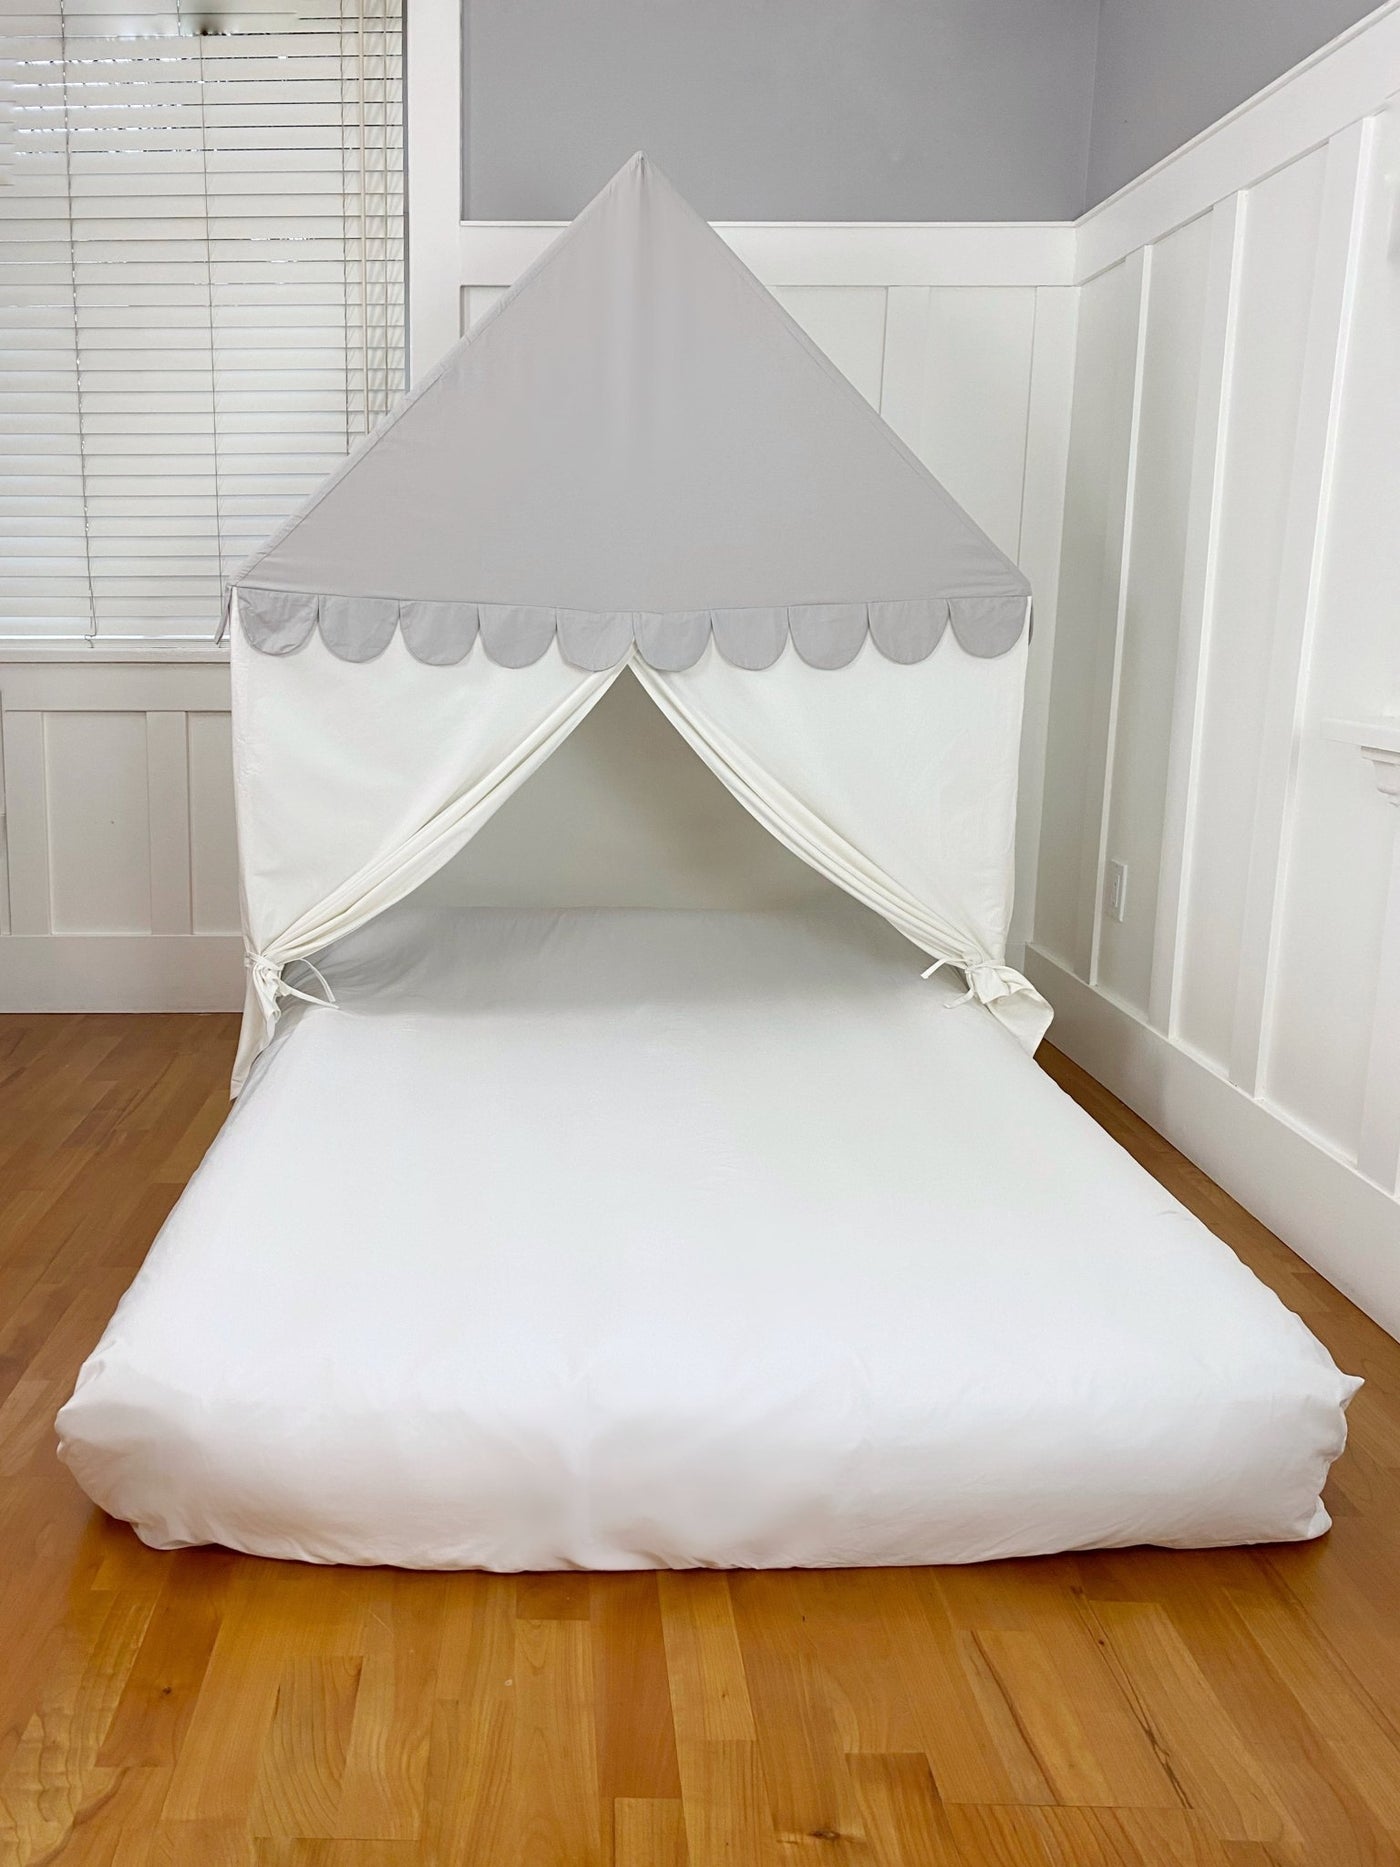 The 'Sweet Dreams' Play House Bed Canopy